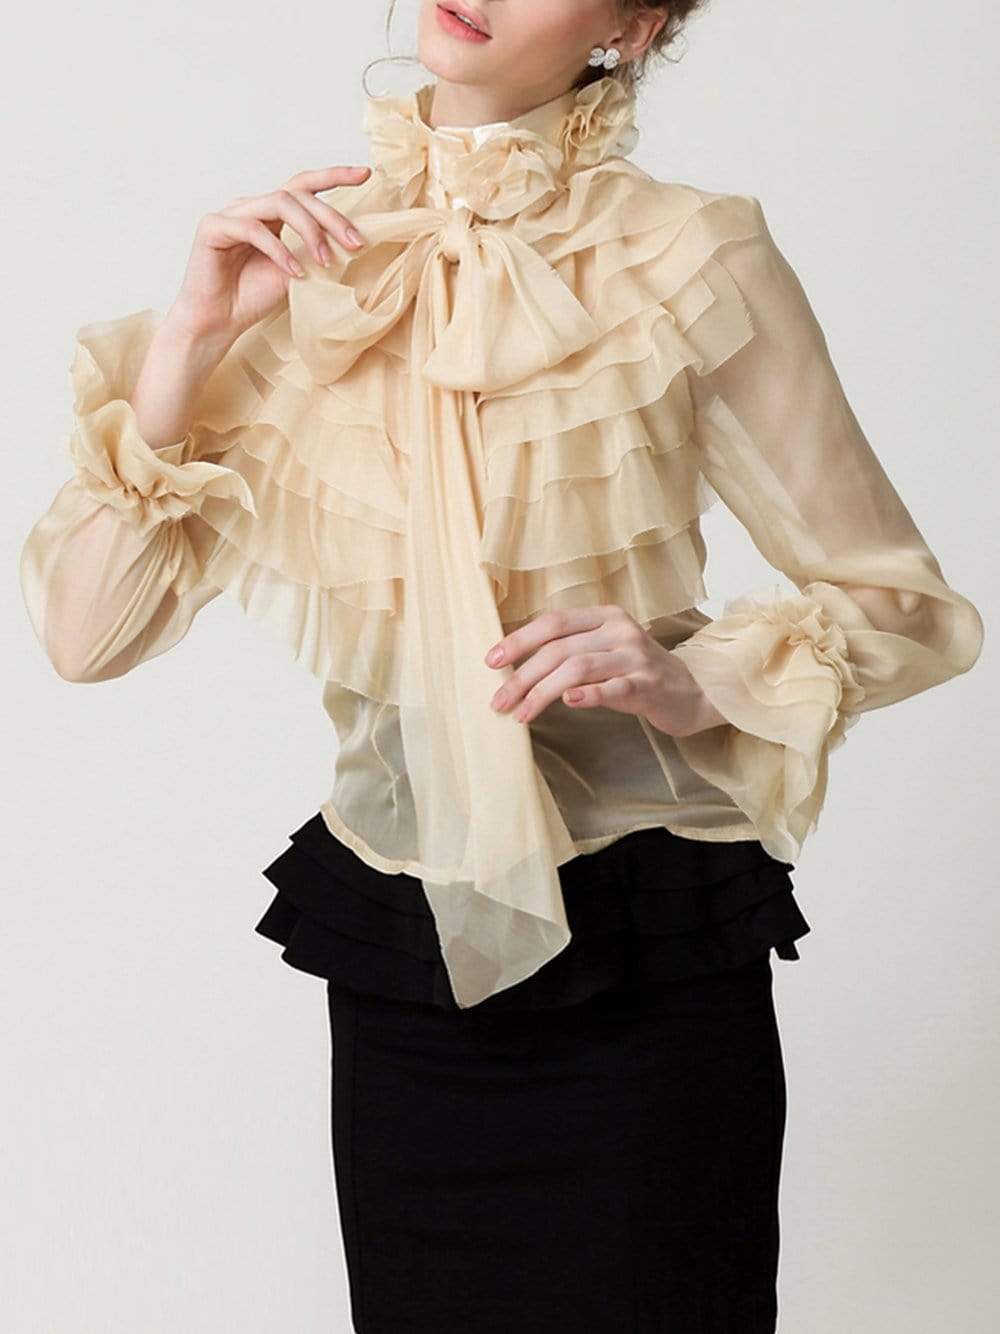 CORAL Bowknot Ruffle Blouse in Apricot